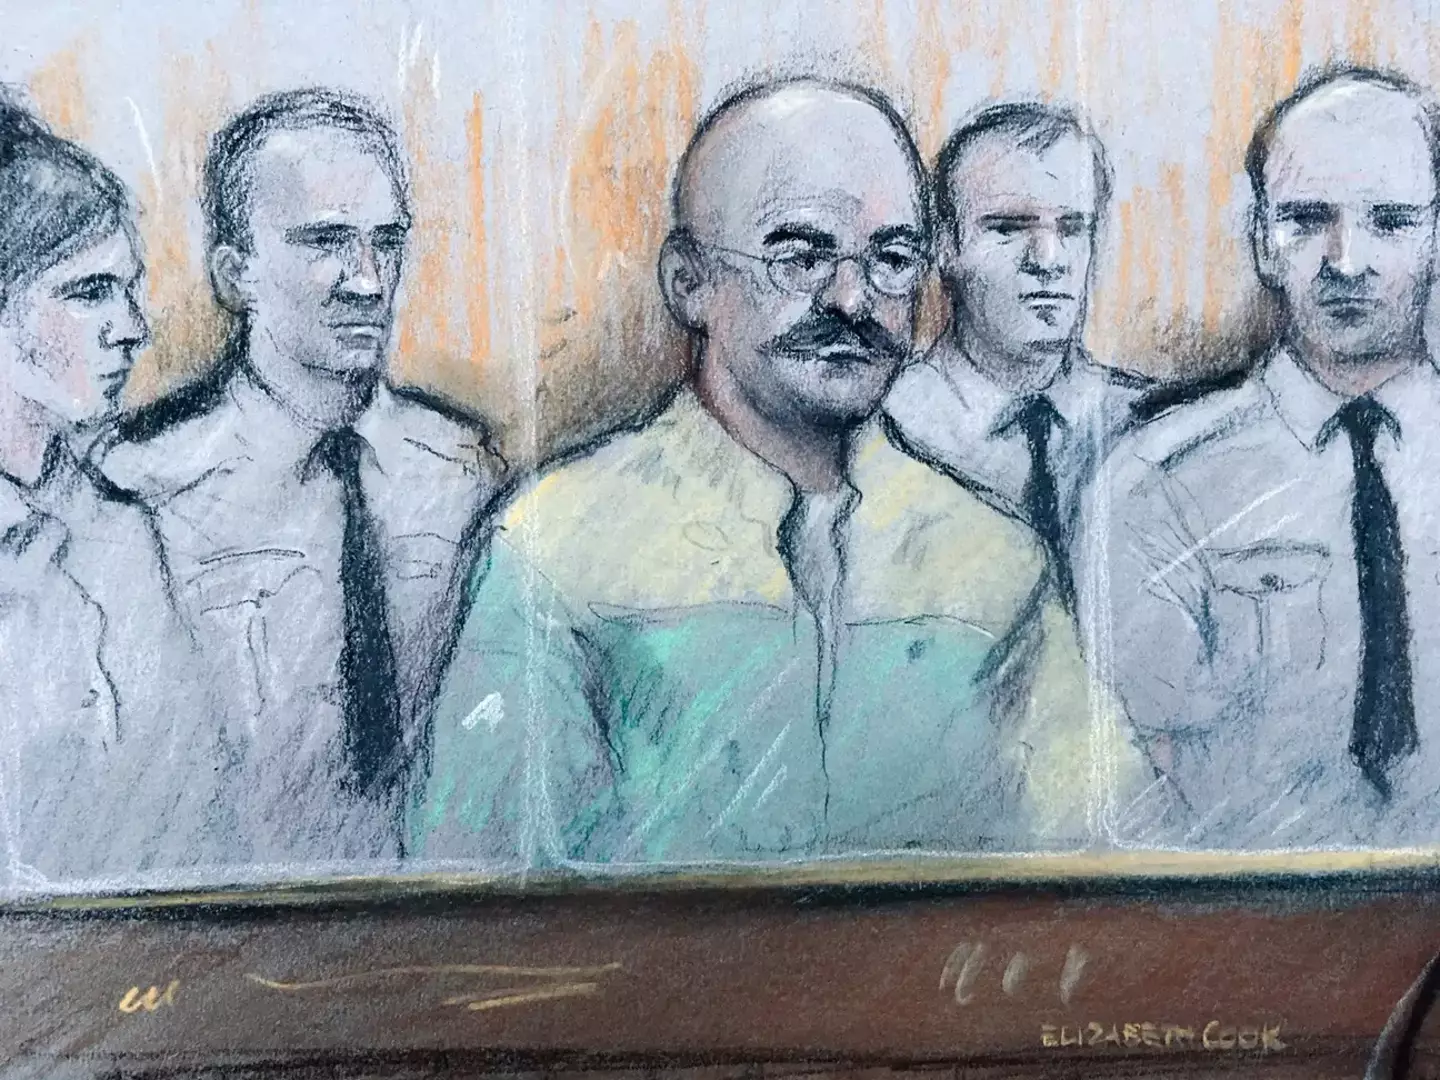 Sketch of Charles Bronson in court.